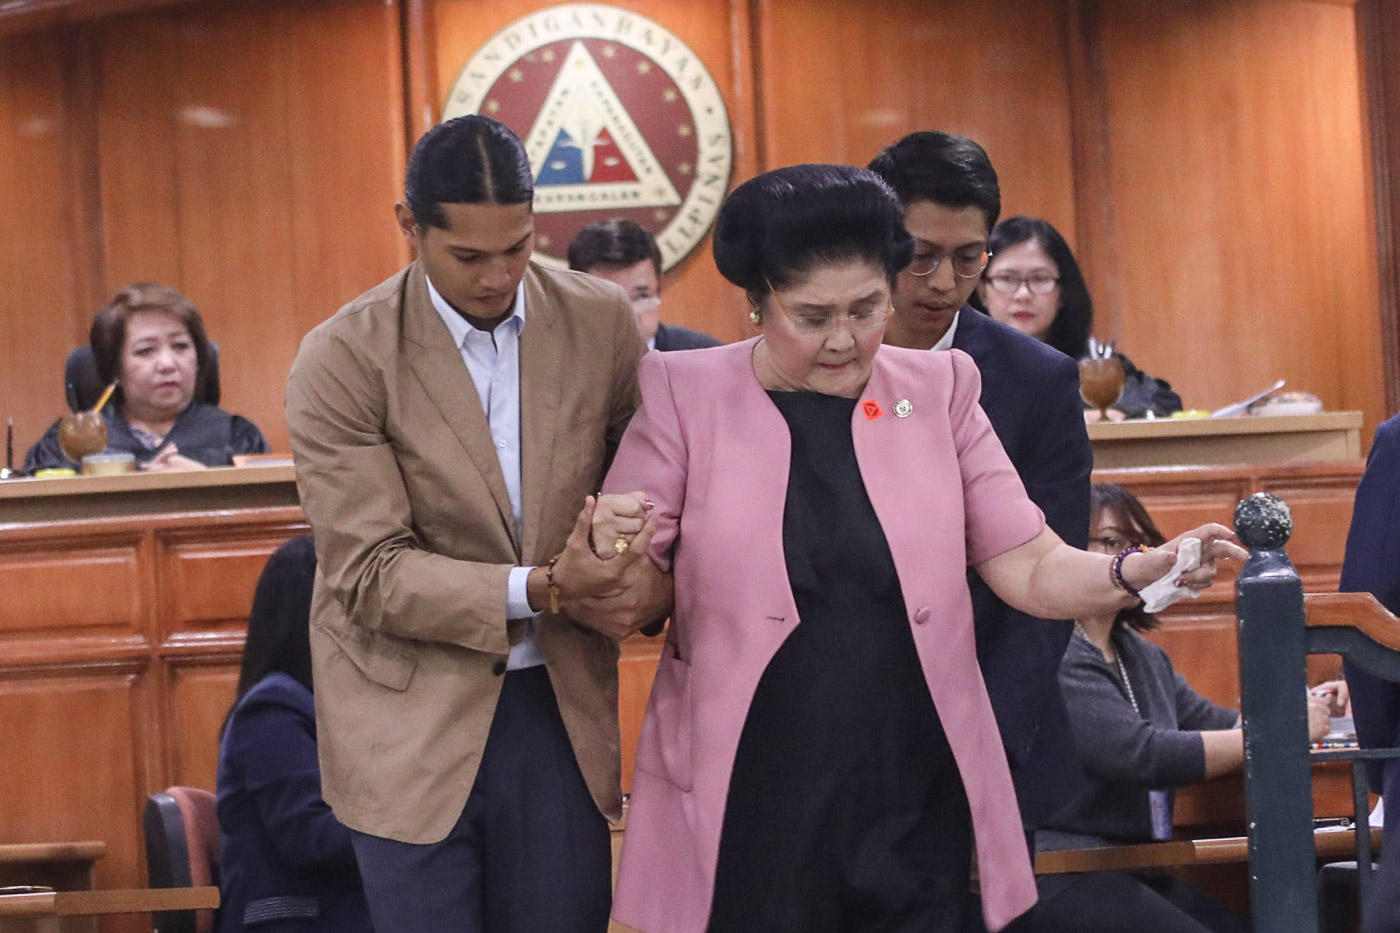 IMELDA MARCOS. To appeal for post-conviction bail, the former first lady makes an appearance at the Sandiganbayan on November 16. Photo by Darren Langit/Rappler  